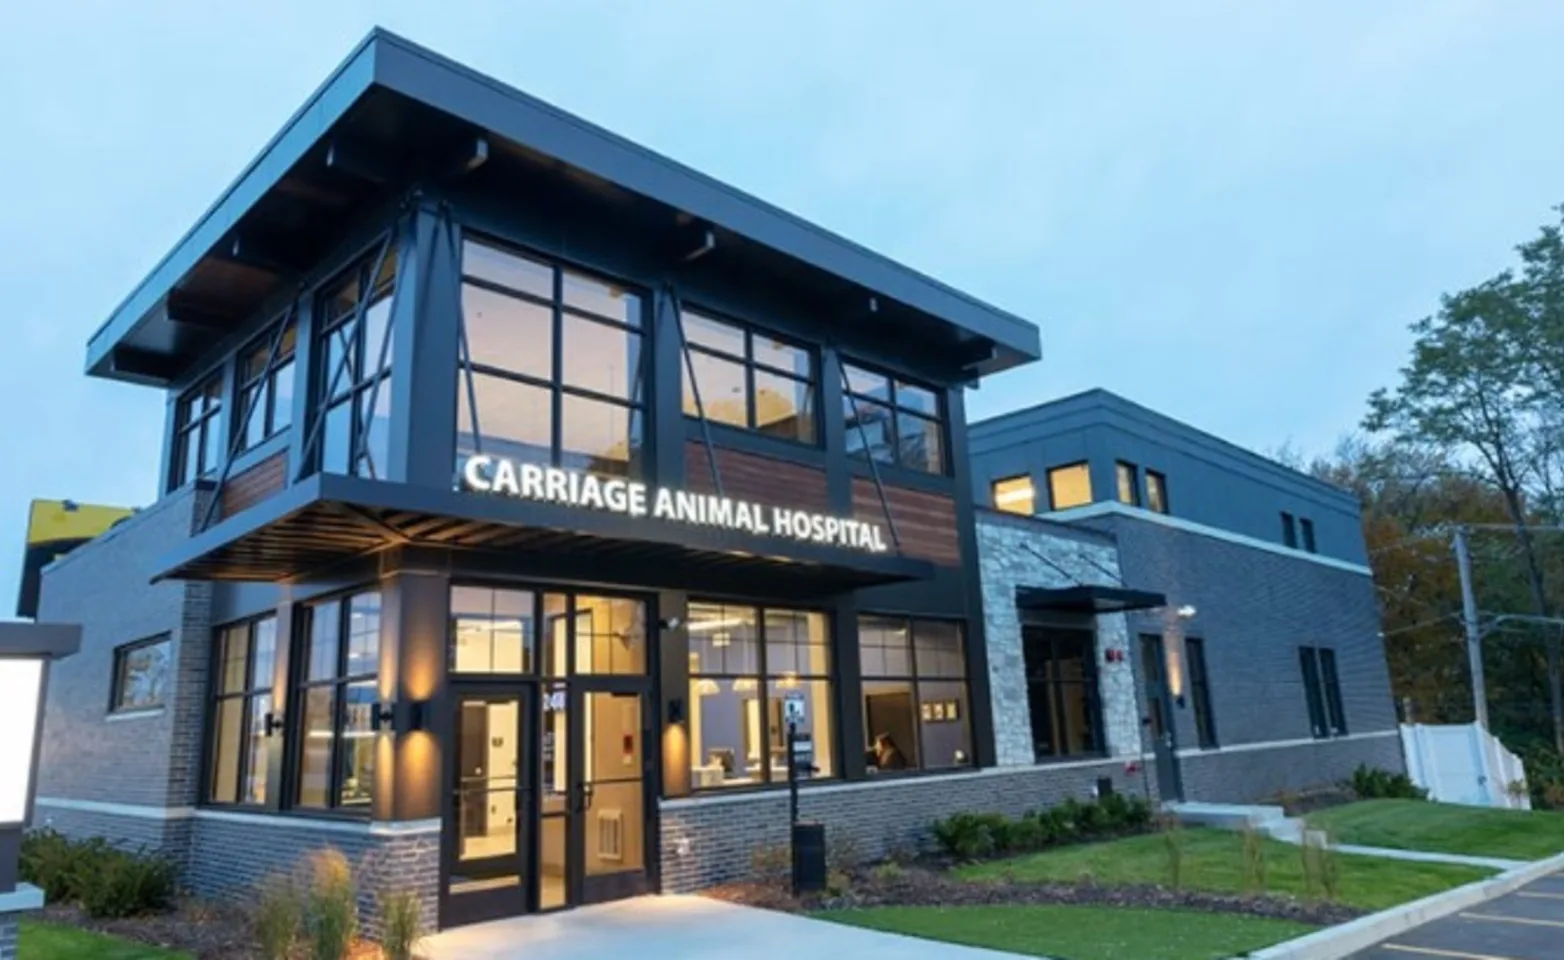 Carriage Animal Hospital exterior and front entrance in Lombard, IL